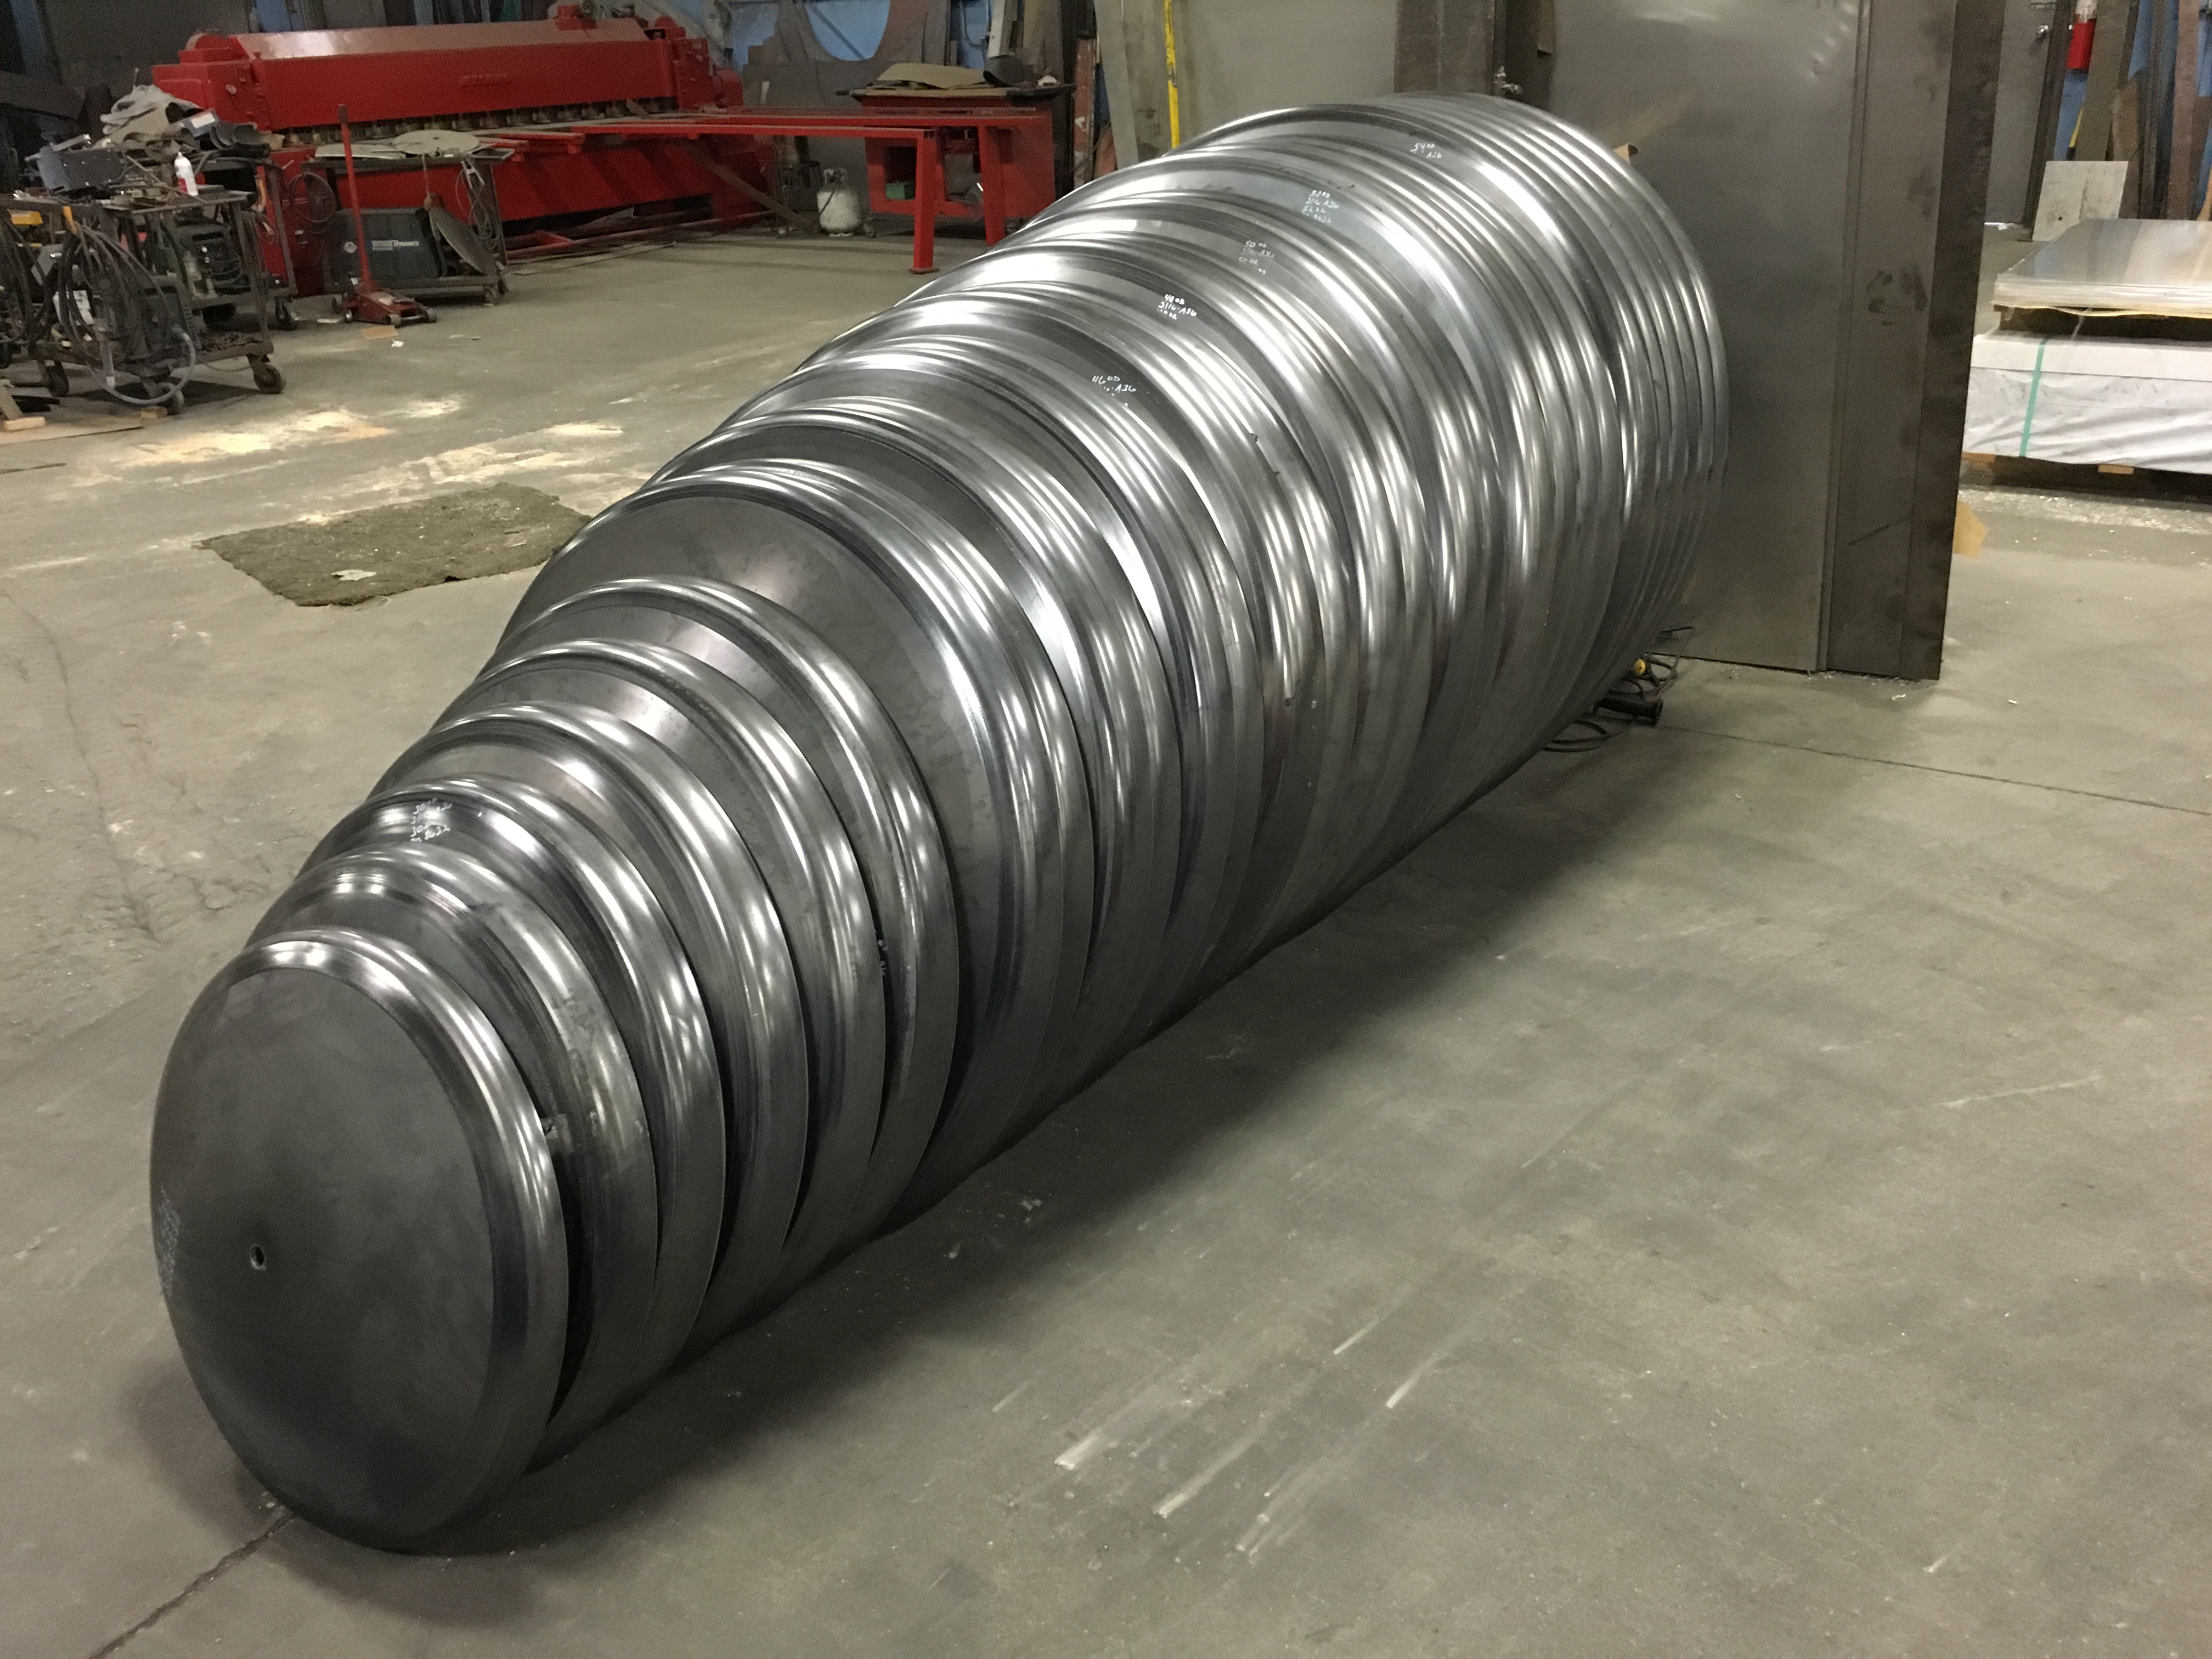 Carbon Steel Tank heads any size any quantity